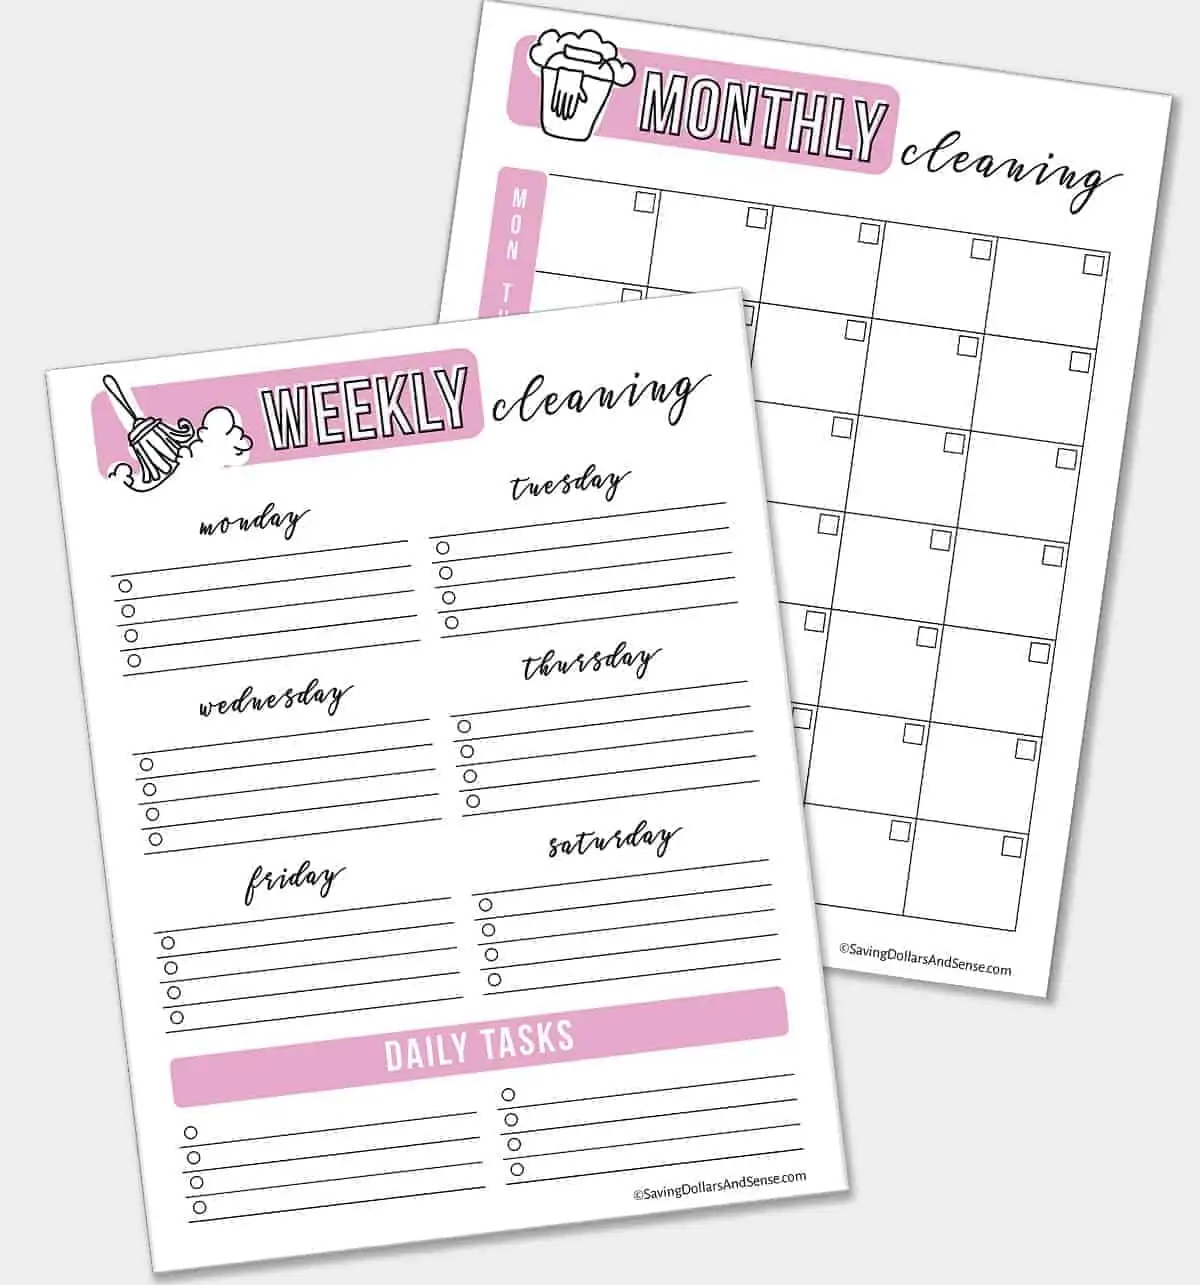 Grab Your FREE Printable Cleaning Schedules